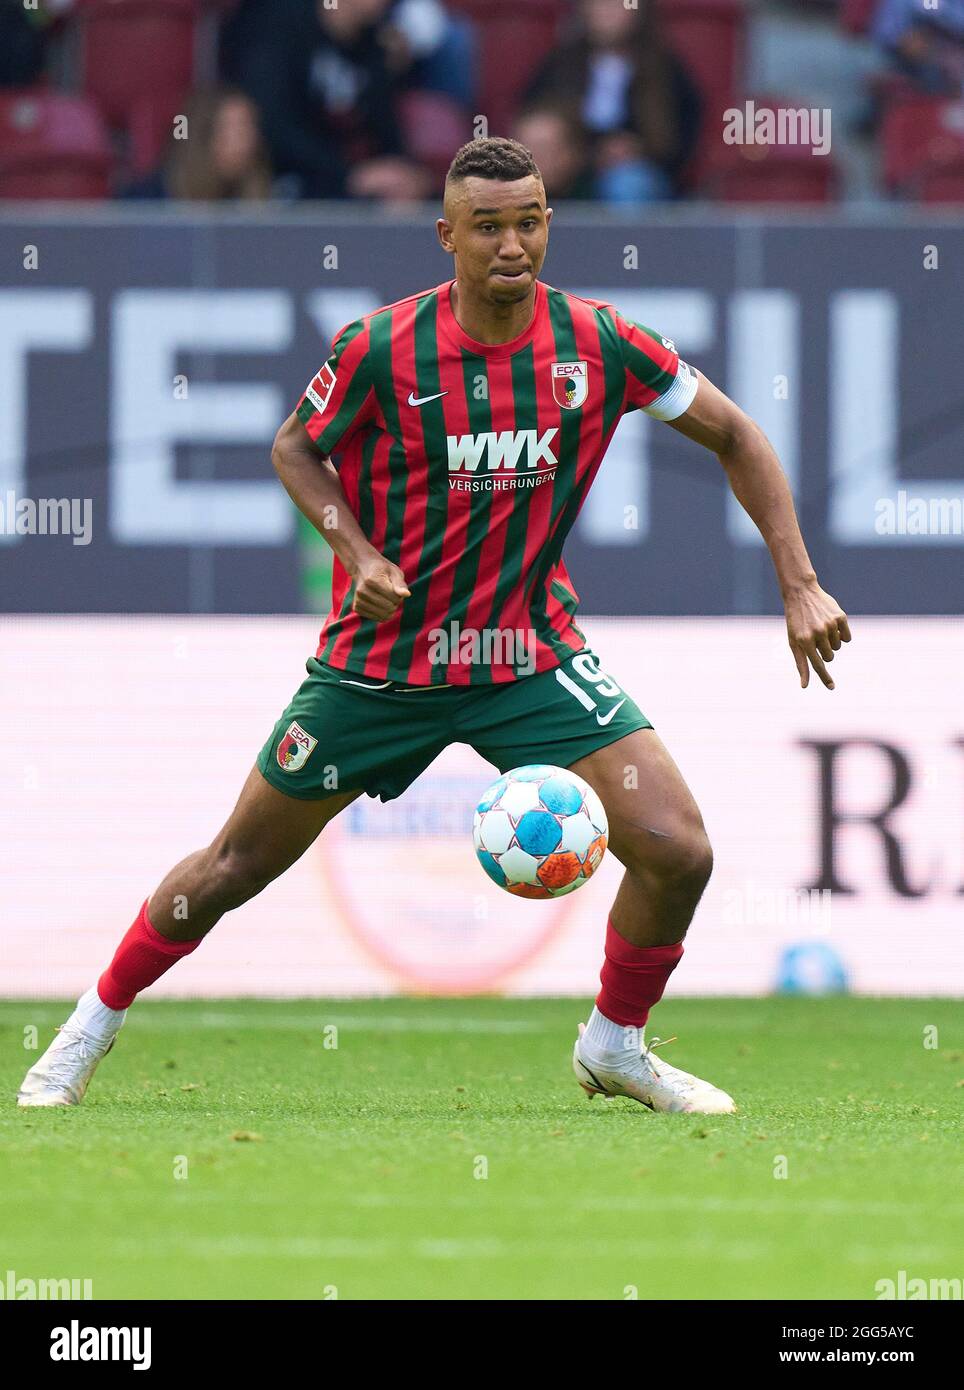 Felix UDUOKHAI, FCA 19   in the match FC AUGSBURG - BAYER 04 LEVERKUSEN 1-4 1.German Football League on August 28, 2021 in Augsburg, Germany  Season 2021/2022, matchday 3, 1.Bundesliga, 3.Spieltag. © Peter Schatz / Alamy Live News    - DFL REGULATIONS PROHIBIT ANY USE OF PHOTOGRAPHS as IMAGE SEQUENCES and/or QUASI-VIDEO - Stock Photo